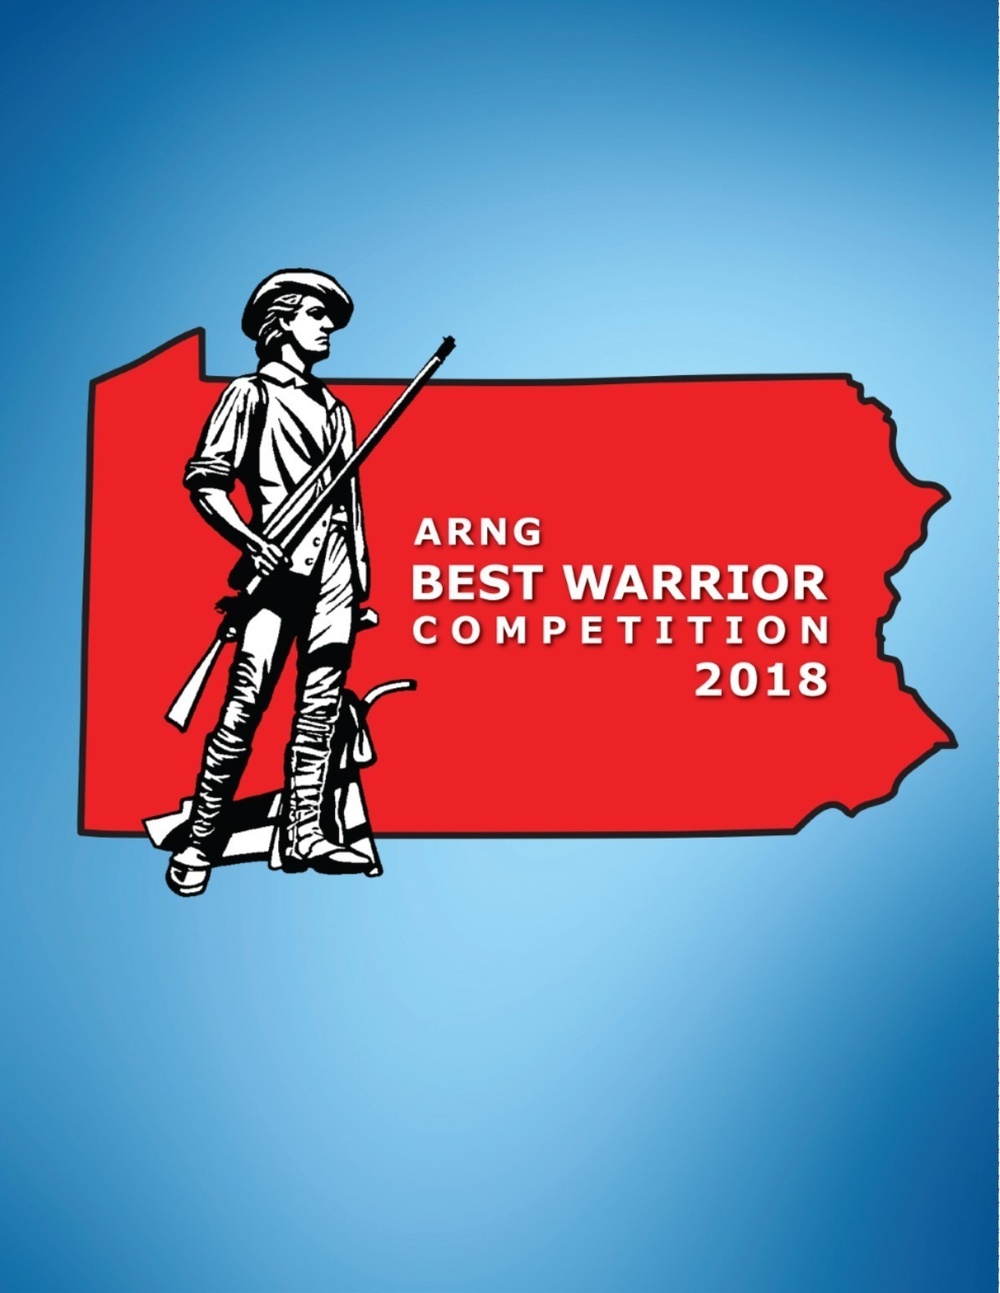 Pennsylvania National Guard preparing to host 2018 ARNG Best Warrior Competition